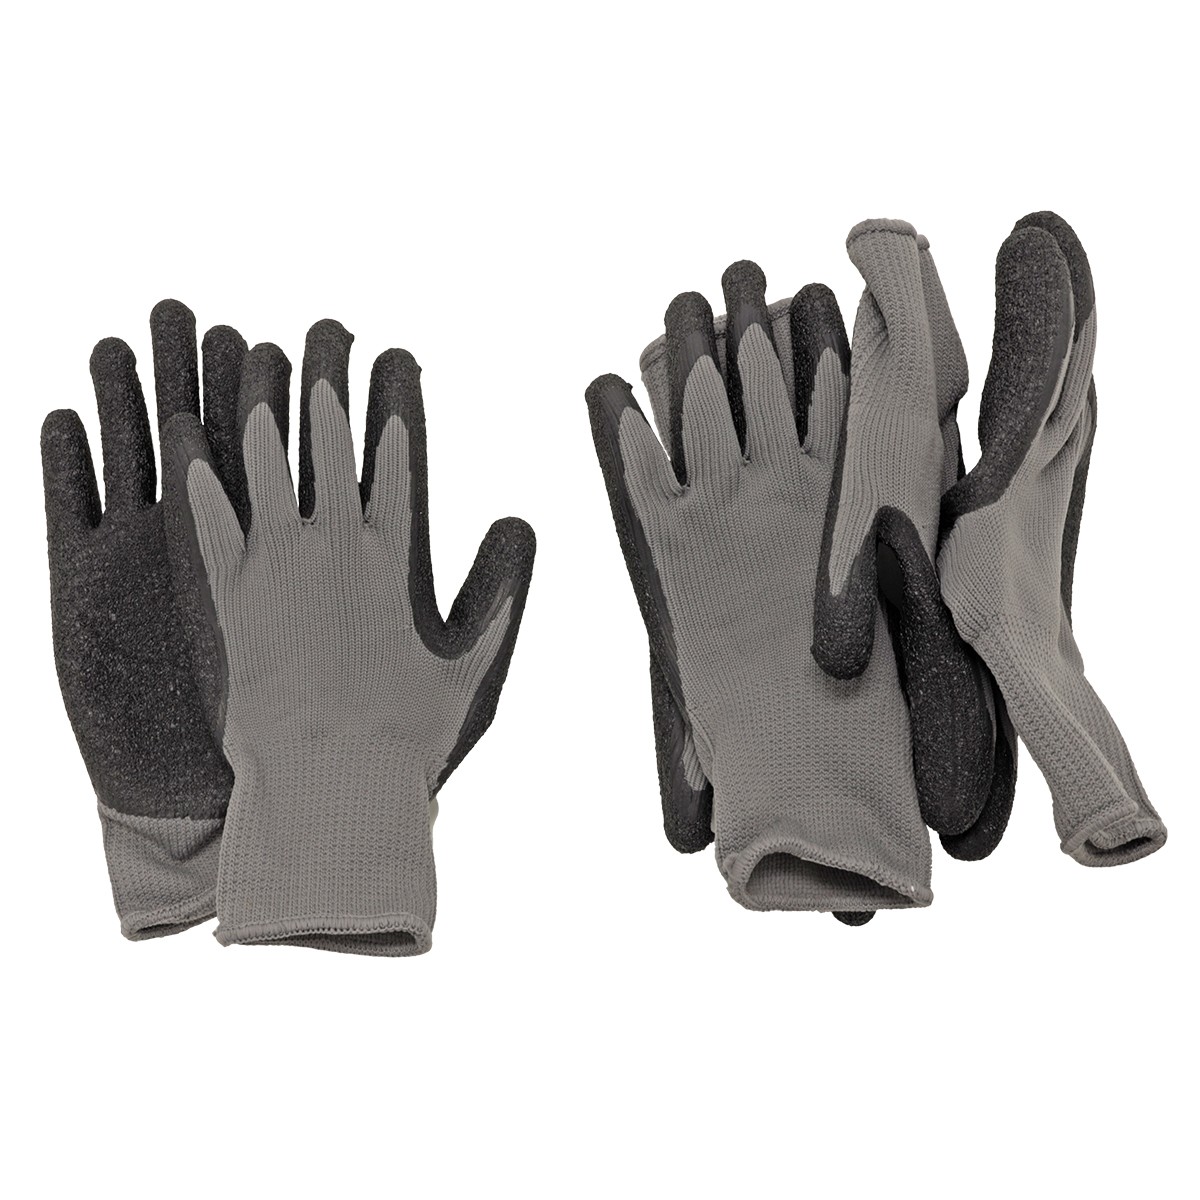 Bco Glove Latex Dipped Fleece Lined 3-Pack